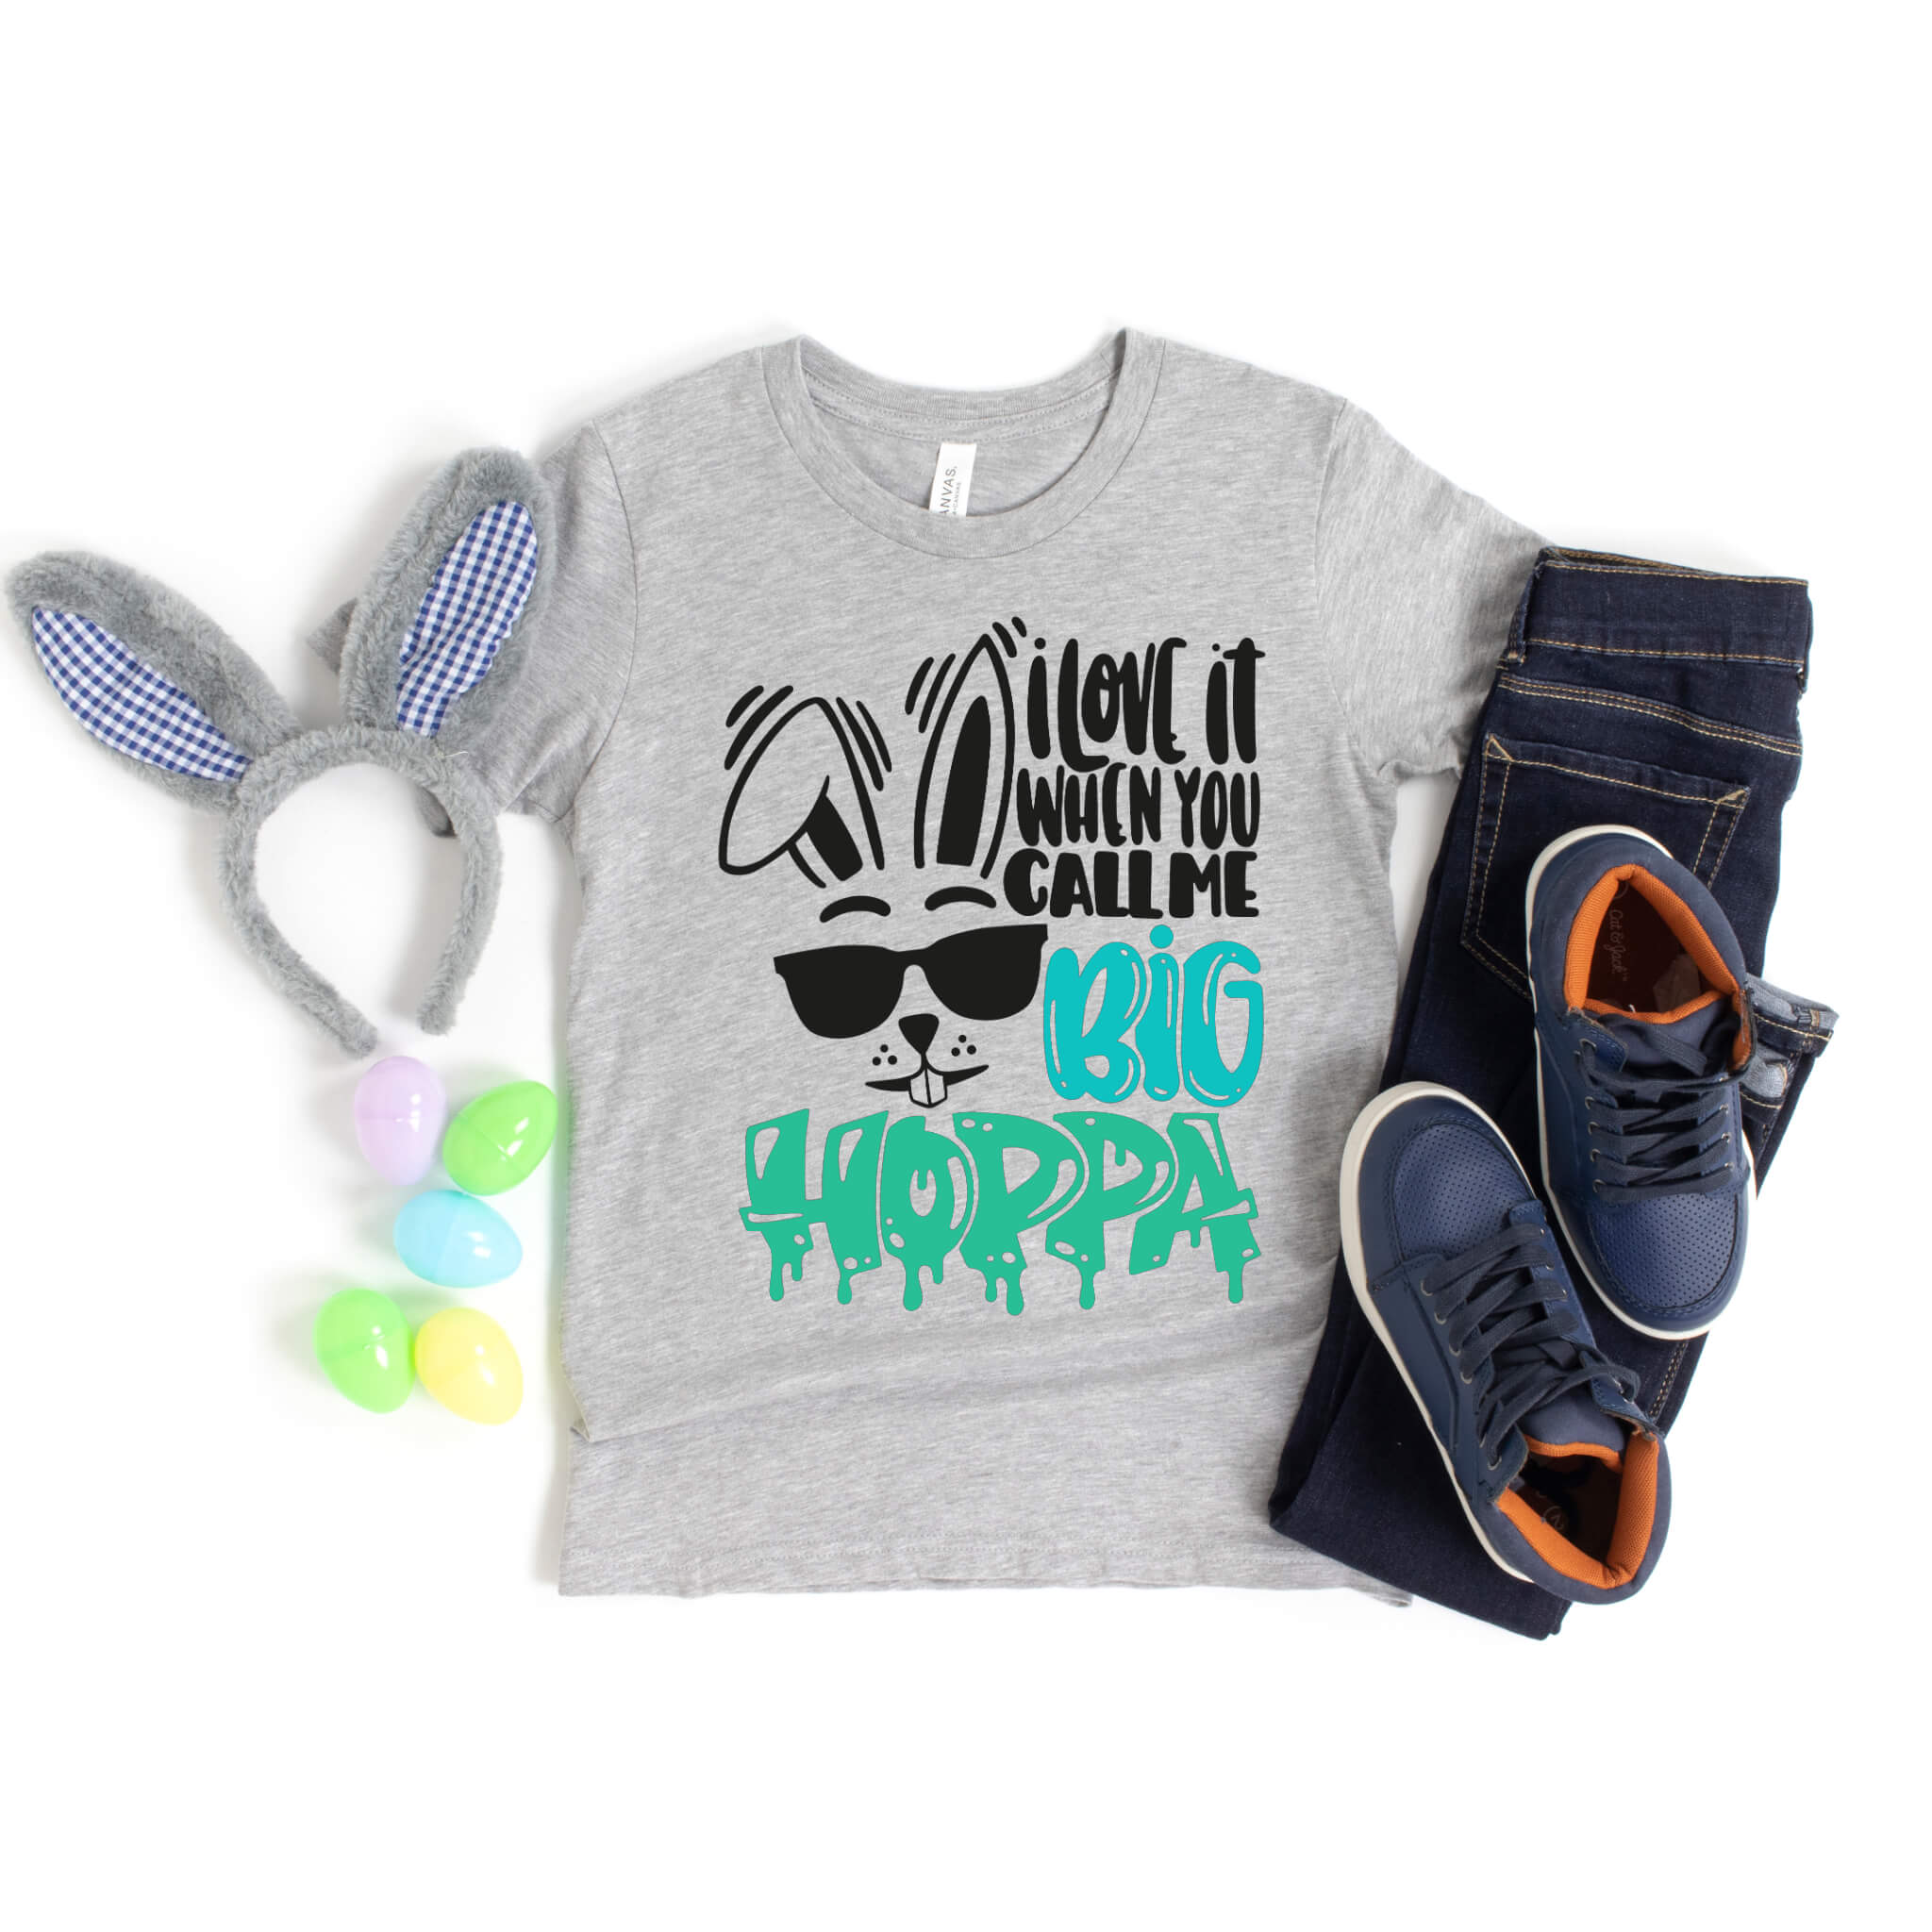 Easter, I Love It When You Call Me Big Hoppa, Funny, Customized, Personalized, Boy's Guy's Men's, Youth, Adult, T-Shirt